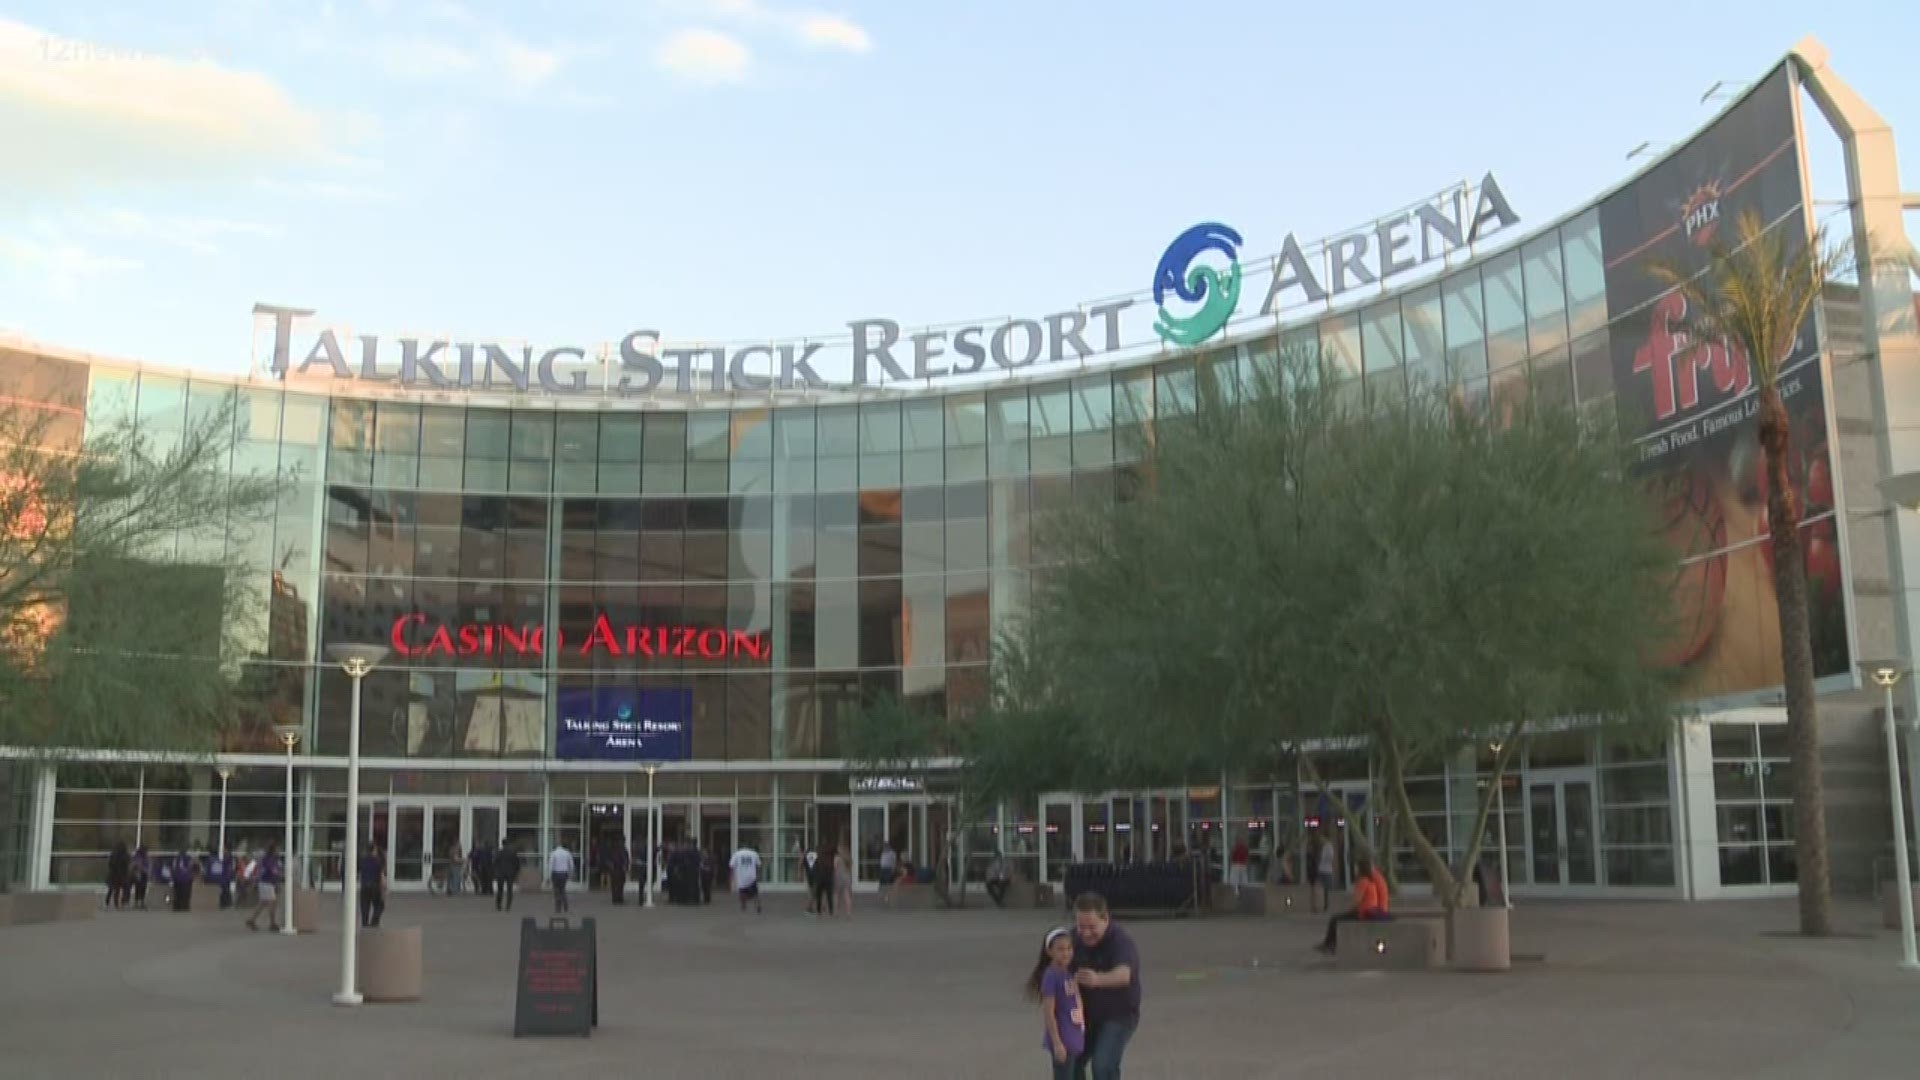 A deal has been reached that will keep the Phoenix Suns at their downtown arena for the next 20 years. The $230 million deal includes the city kicking in $150 million from a sports and facilities fund paid for by a hotel and rental car tax on tourists.